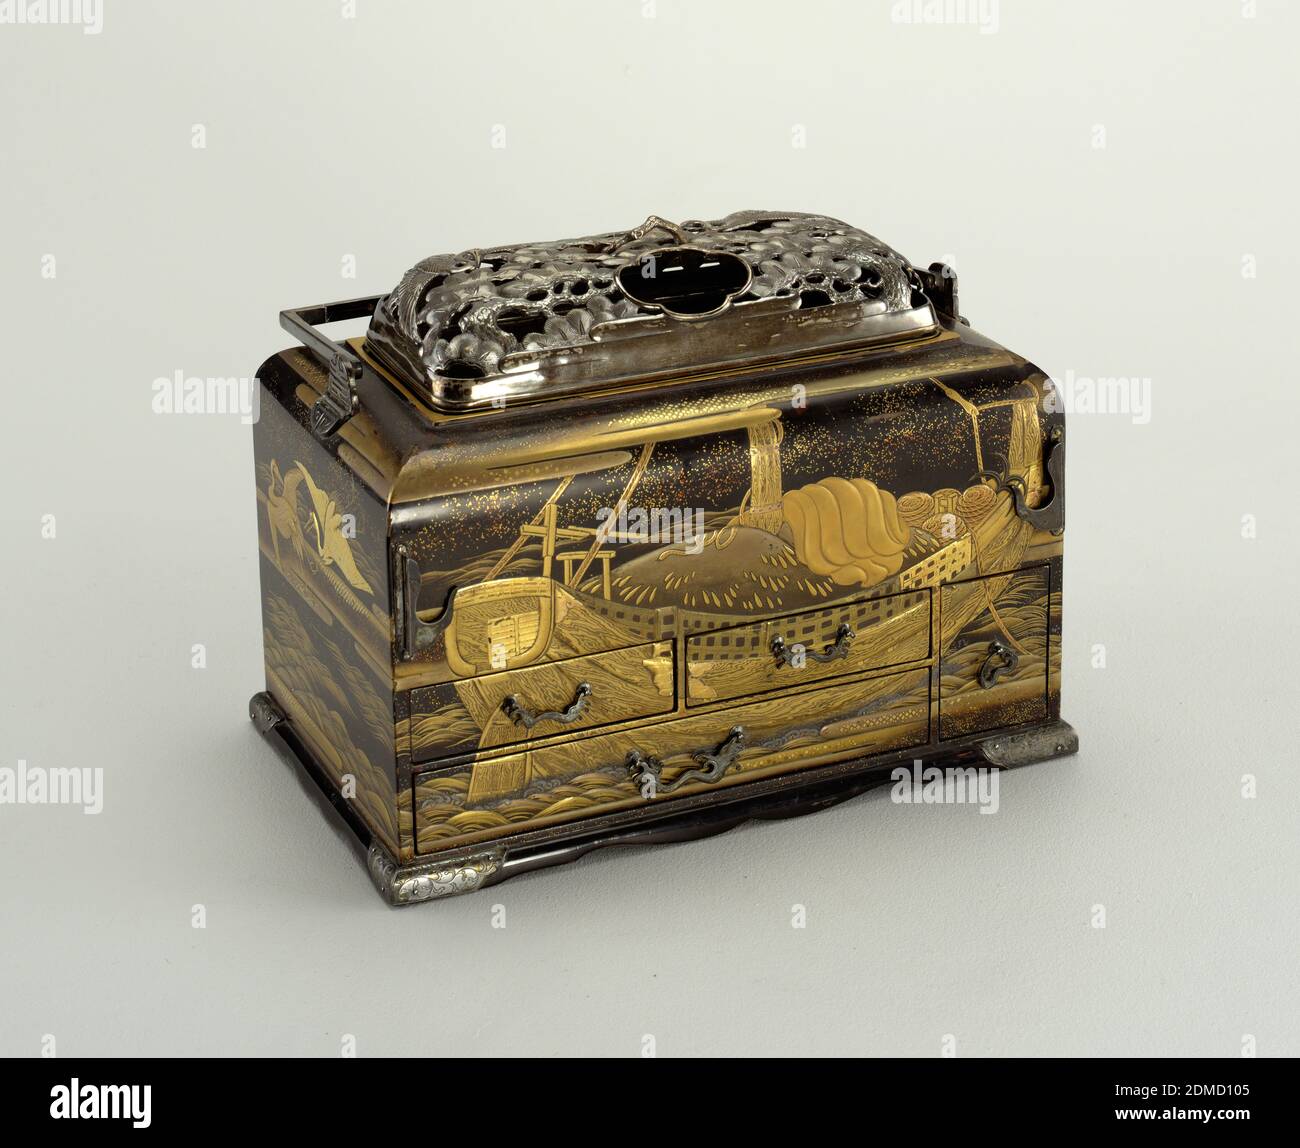 Smoking Stand (Tabako-Bon), wood, lacquer, gold, silver, brass, Rectangular black, gold and red lacquered box (a) with hinged, rectangular silver handle; rectangular domed cover (b) of pierced and molded silver, depicting two flying cranes among pine trees, small loop handle in form of branch at top; deep, rectangular brass tray under cover, set into top of box. Four drawers (d/g) in front of box; one drawer (h) in right side. Continuous lacquer decoration around box showing loaded boat floating on waves, floating dingy, cranes with red crests flying among clouds over water and pine branches Stock Photo